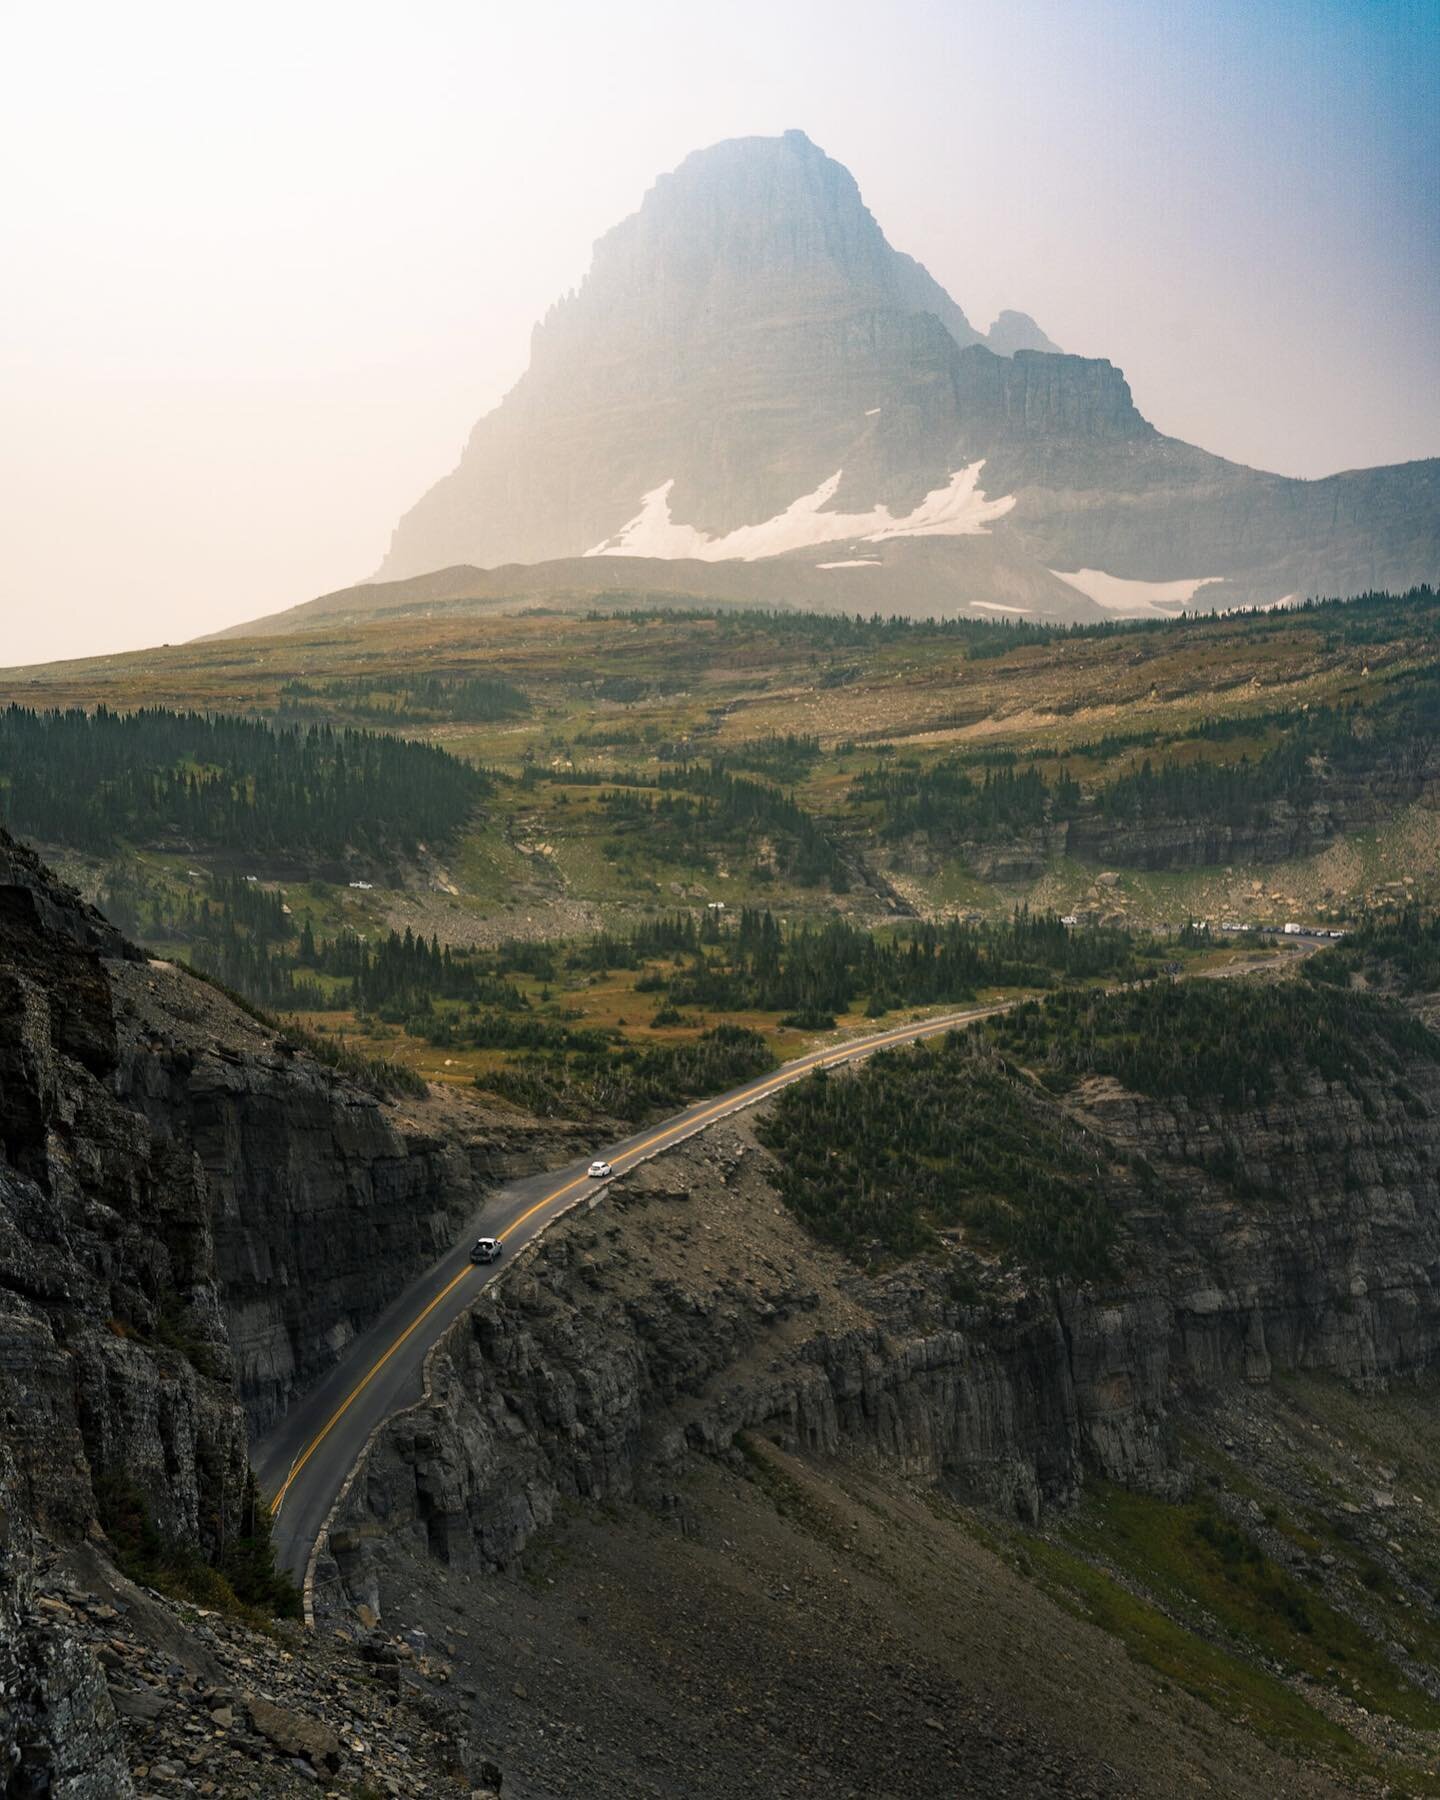 Glacier National Park was great, but wildfire smoke meant it was different from expected. Luckily we can see some of the views through photo editing...swipe to see our view vs. how I edited the photo! This photo brought to you by Lightroom's dehaze s